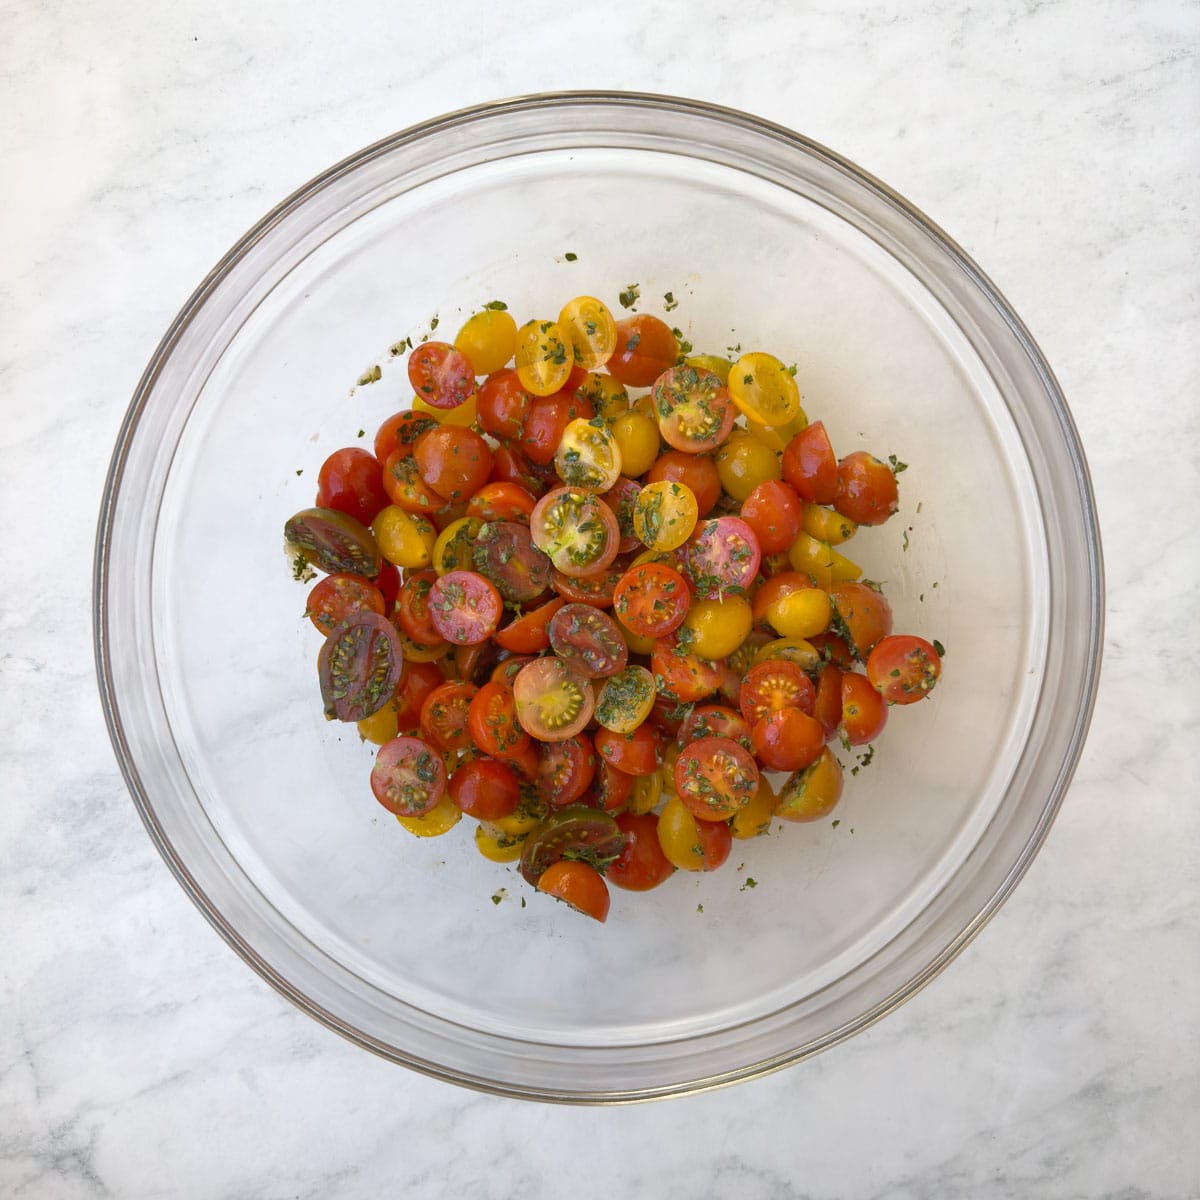 A glass bowl filled with colorful cherry tomatoes tossed with herbs and garlic.